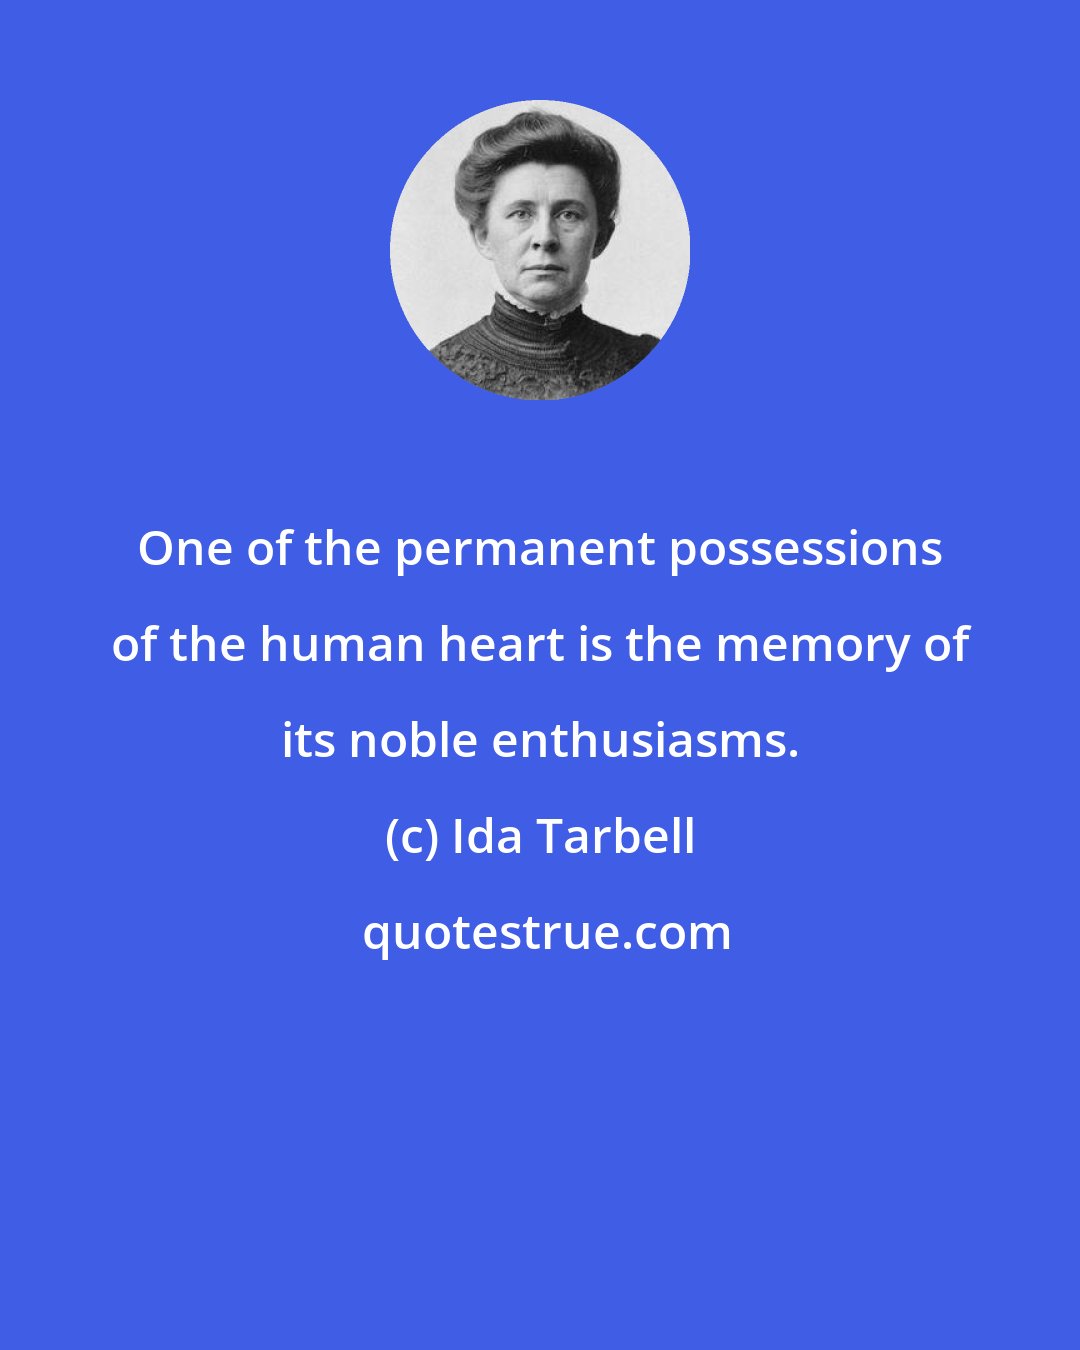 Ida Tarbell: One of the permanent possessions of the human heart is the memory of its noble enthusiasms.